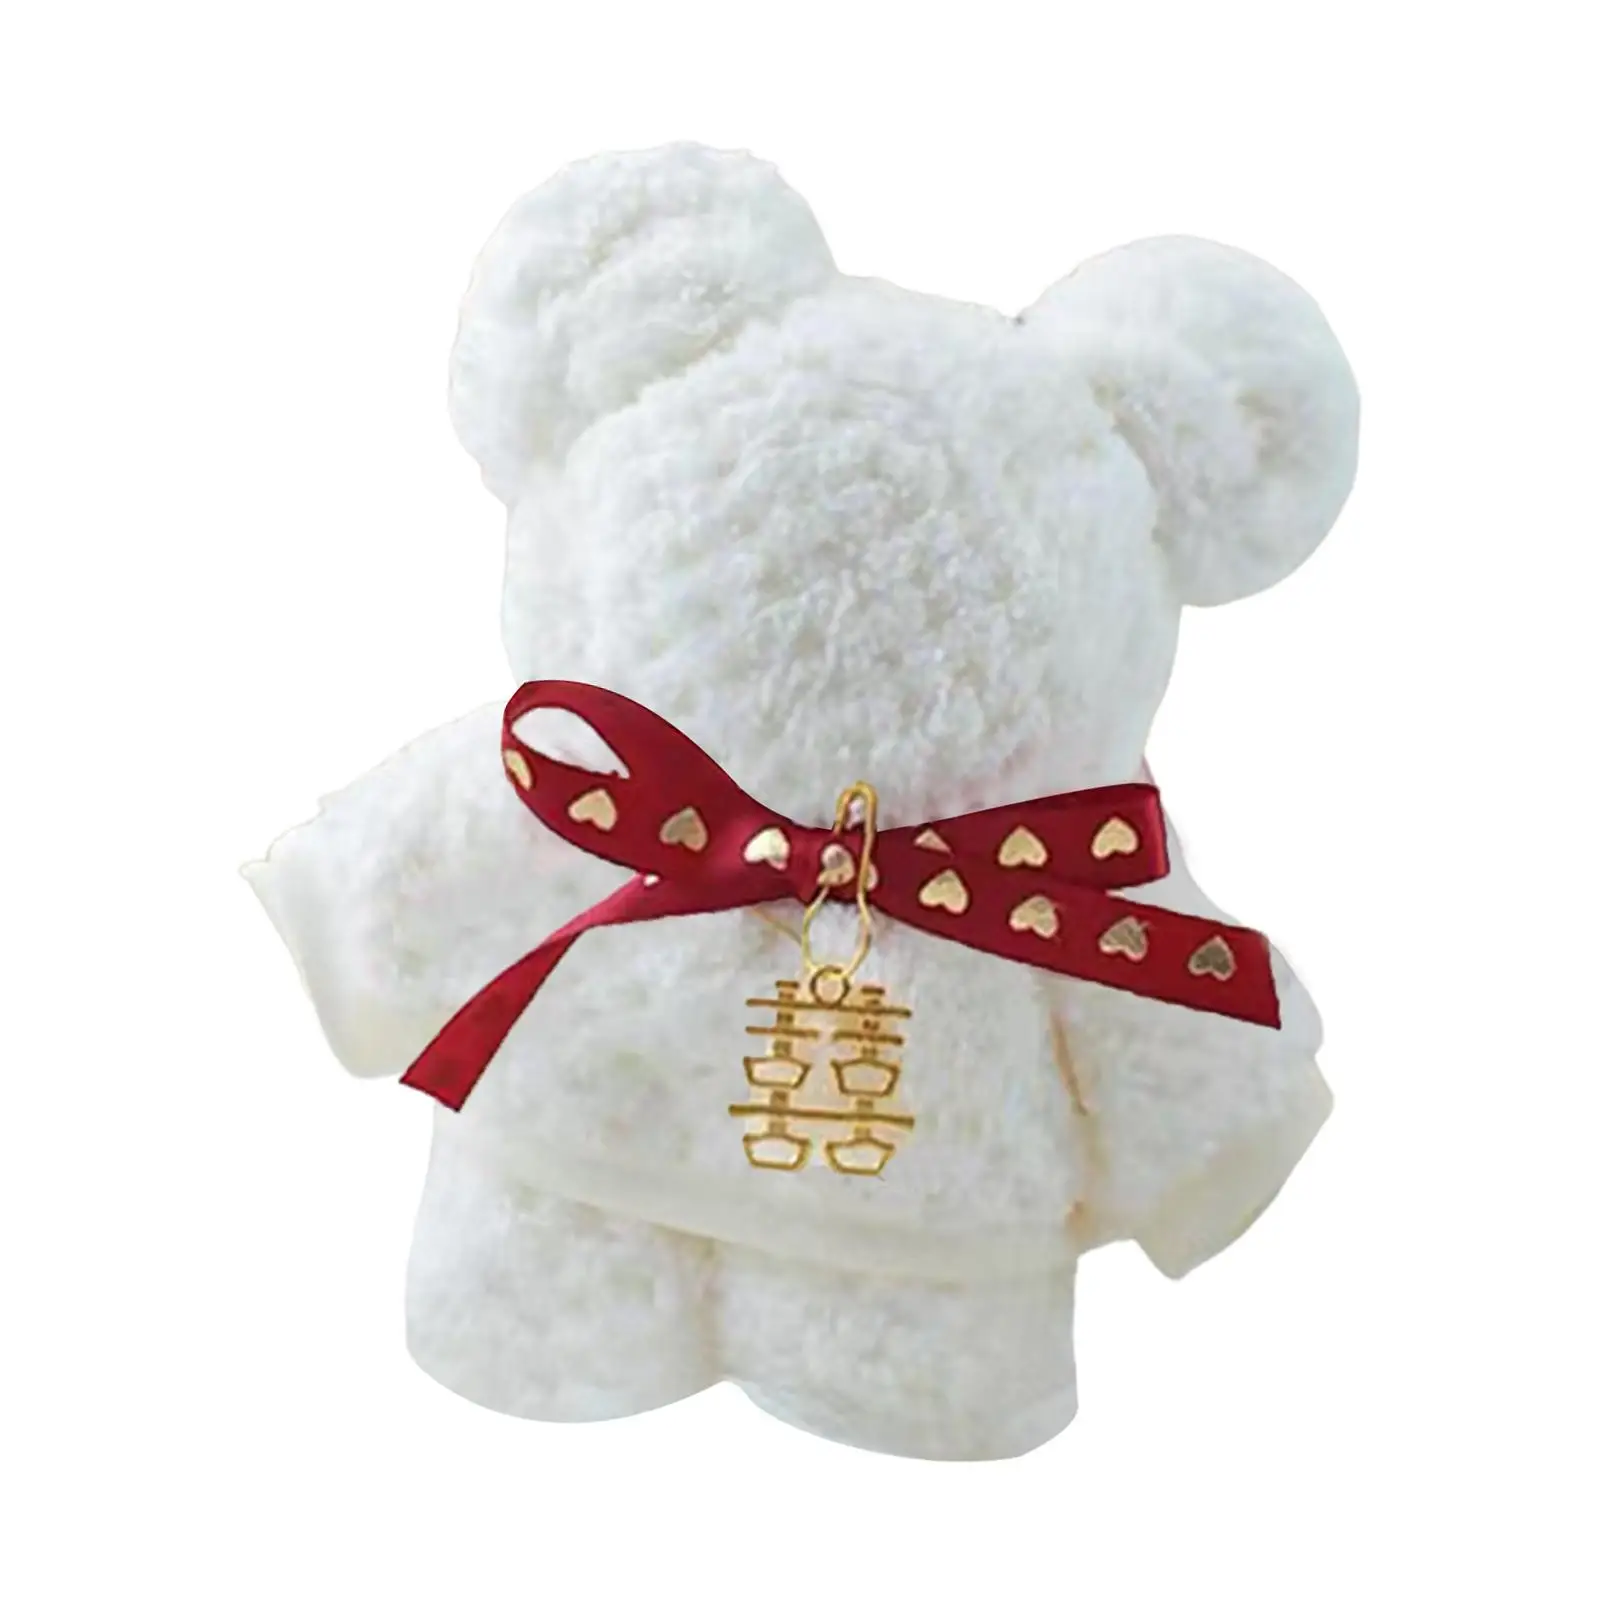 Bear Shaped Towels, Kitchen Household Towels, Cute Quick-drying Animal Bear